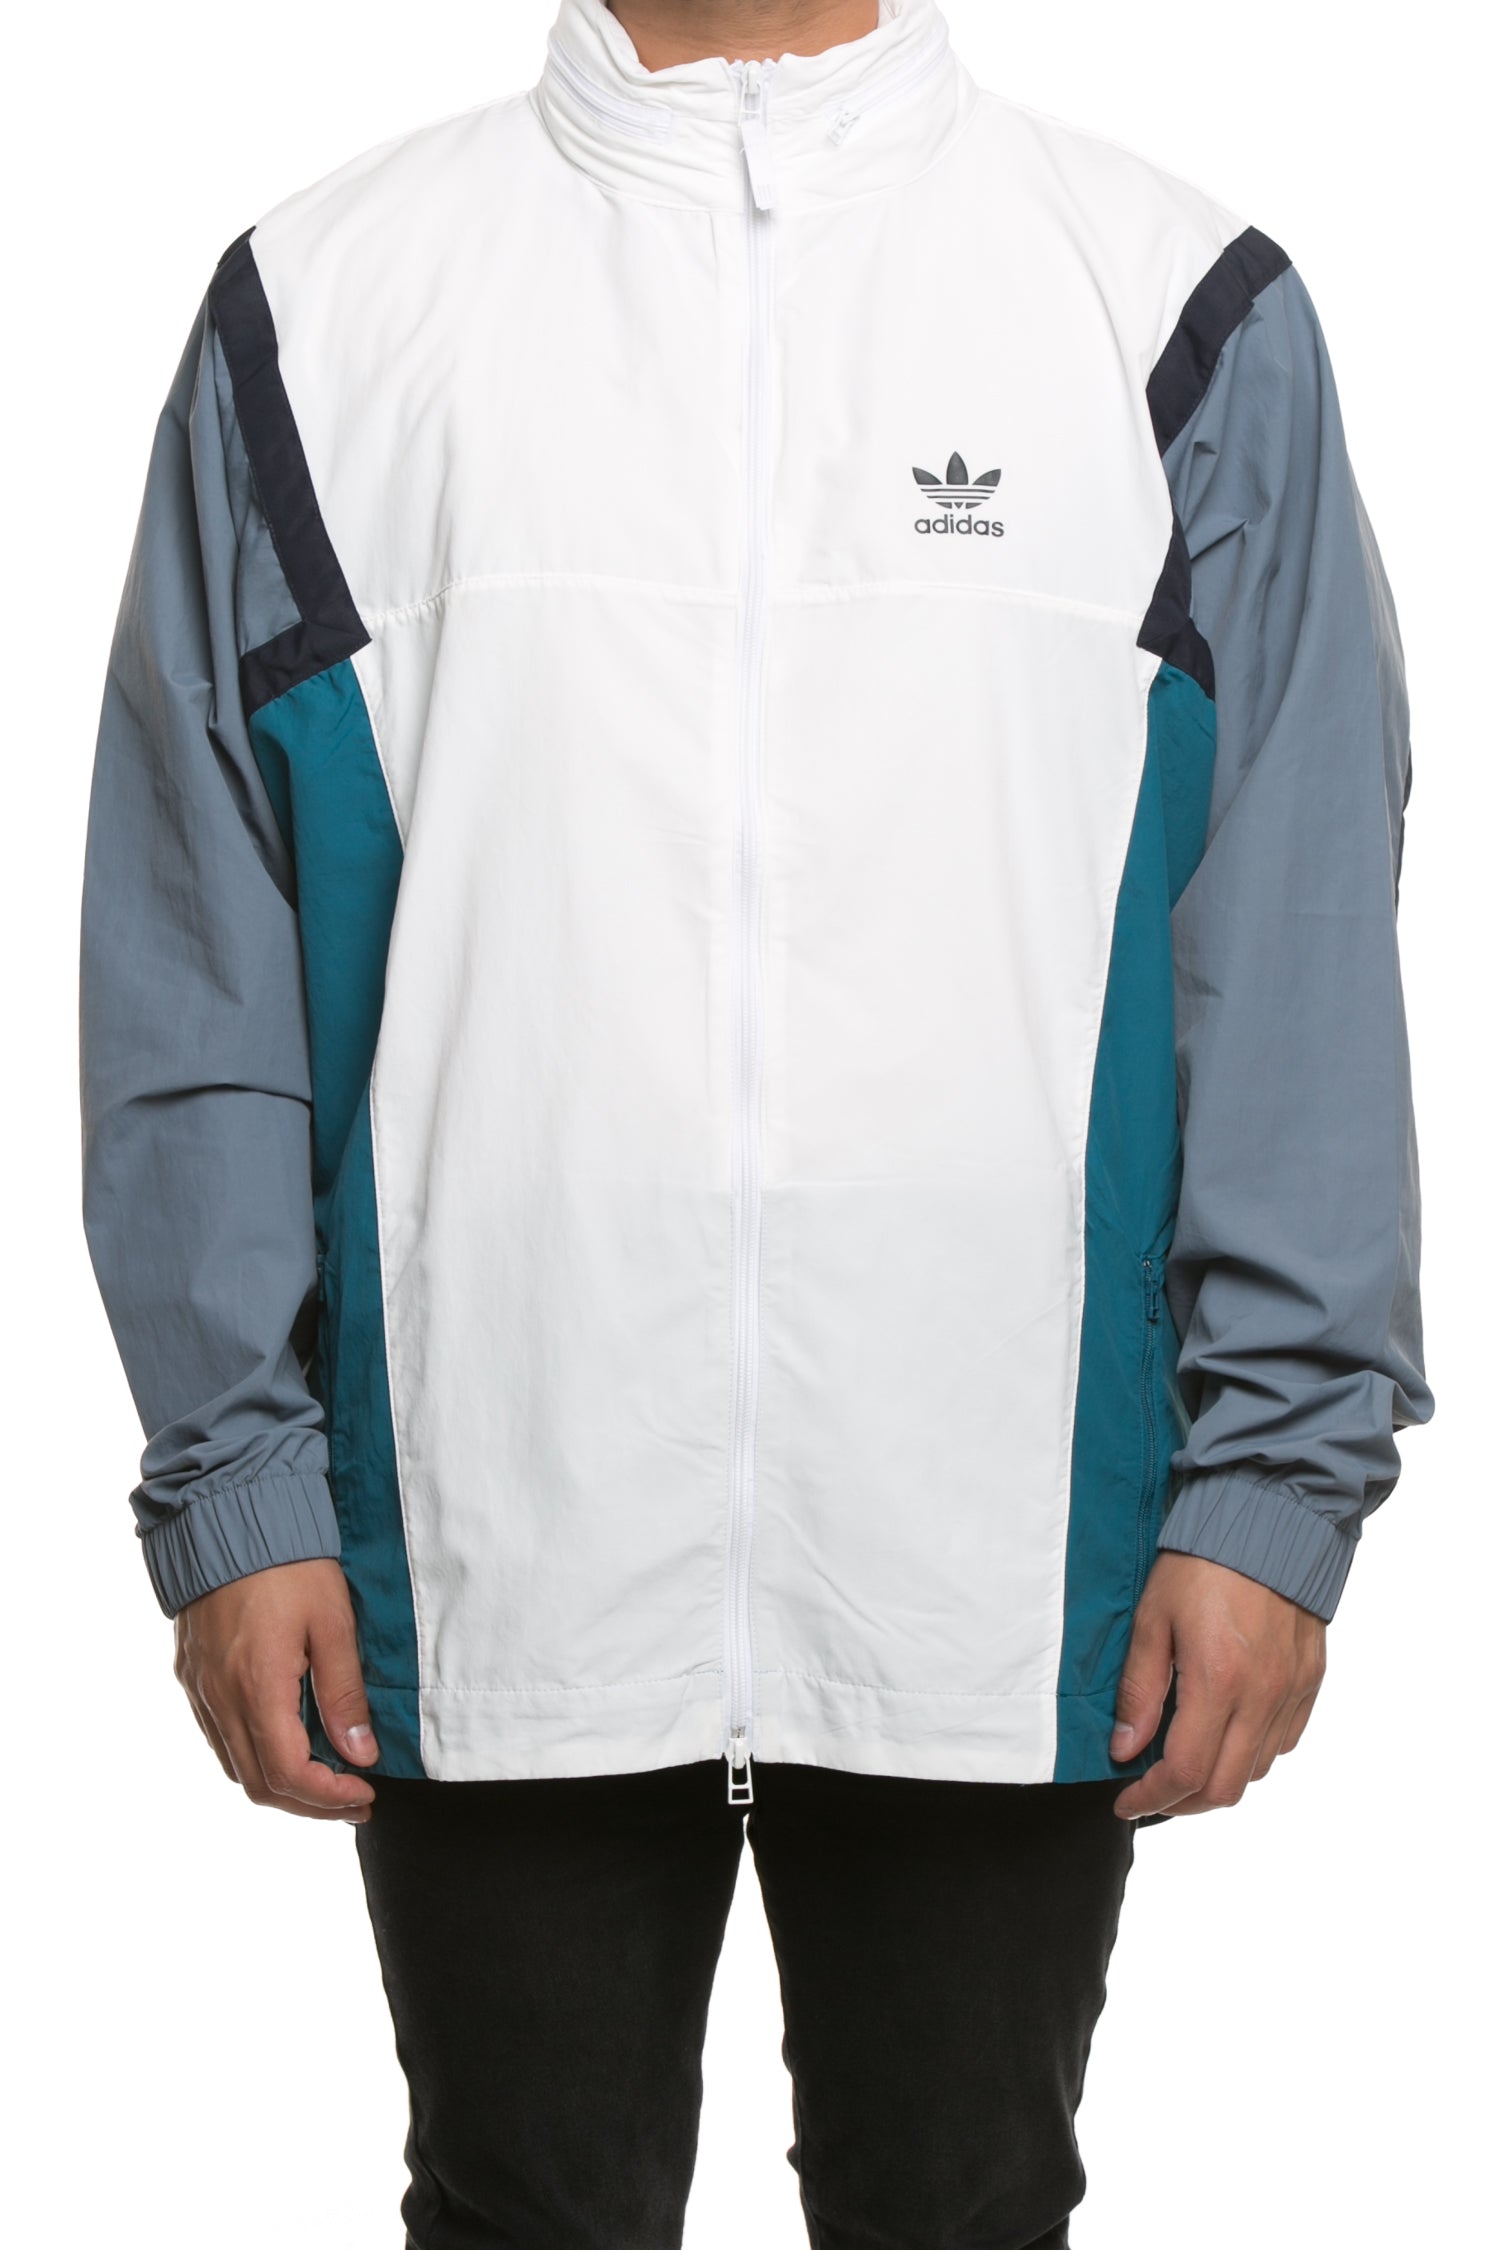 adidas linear track top